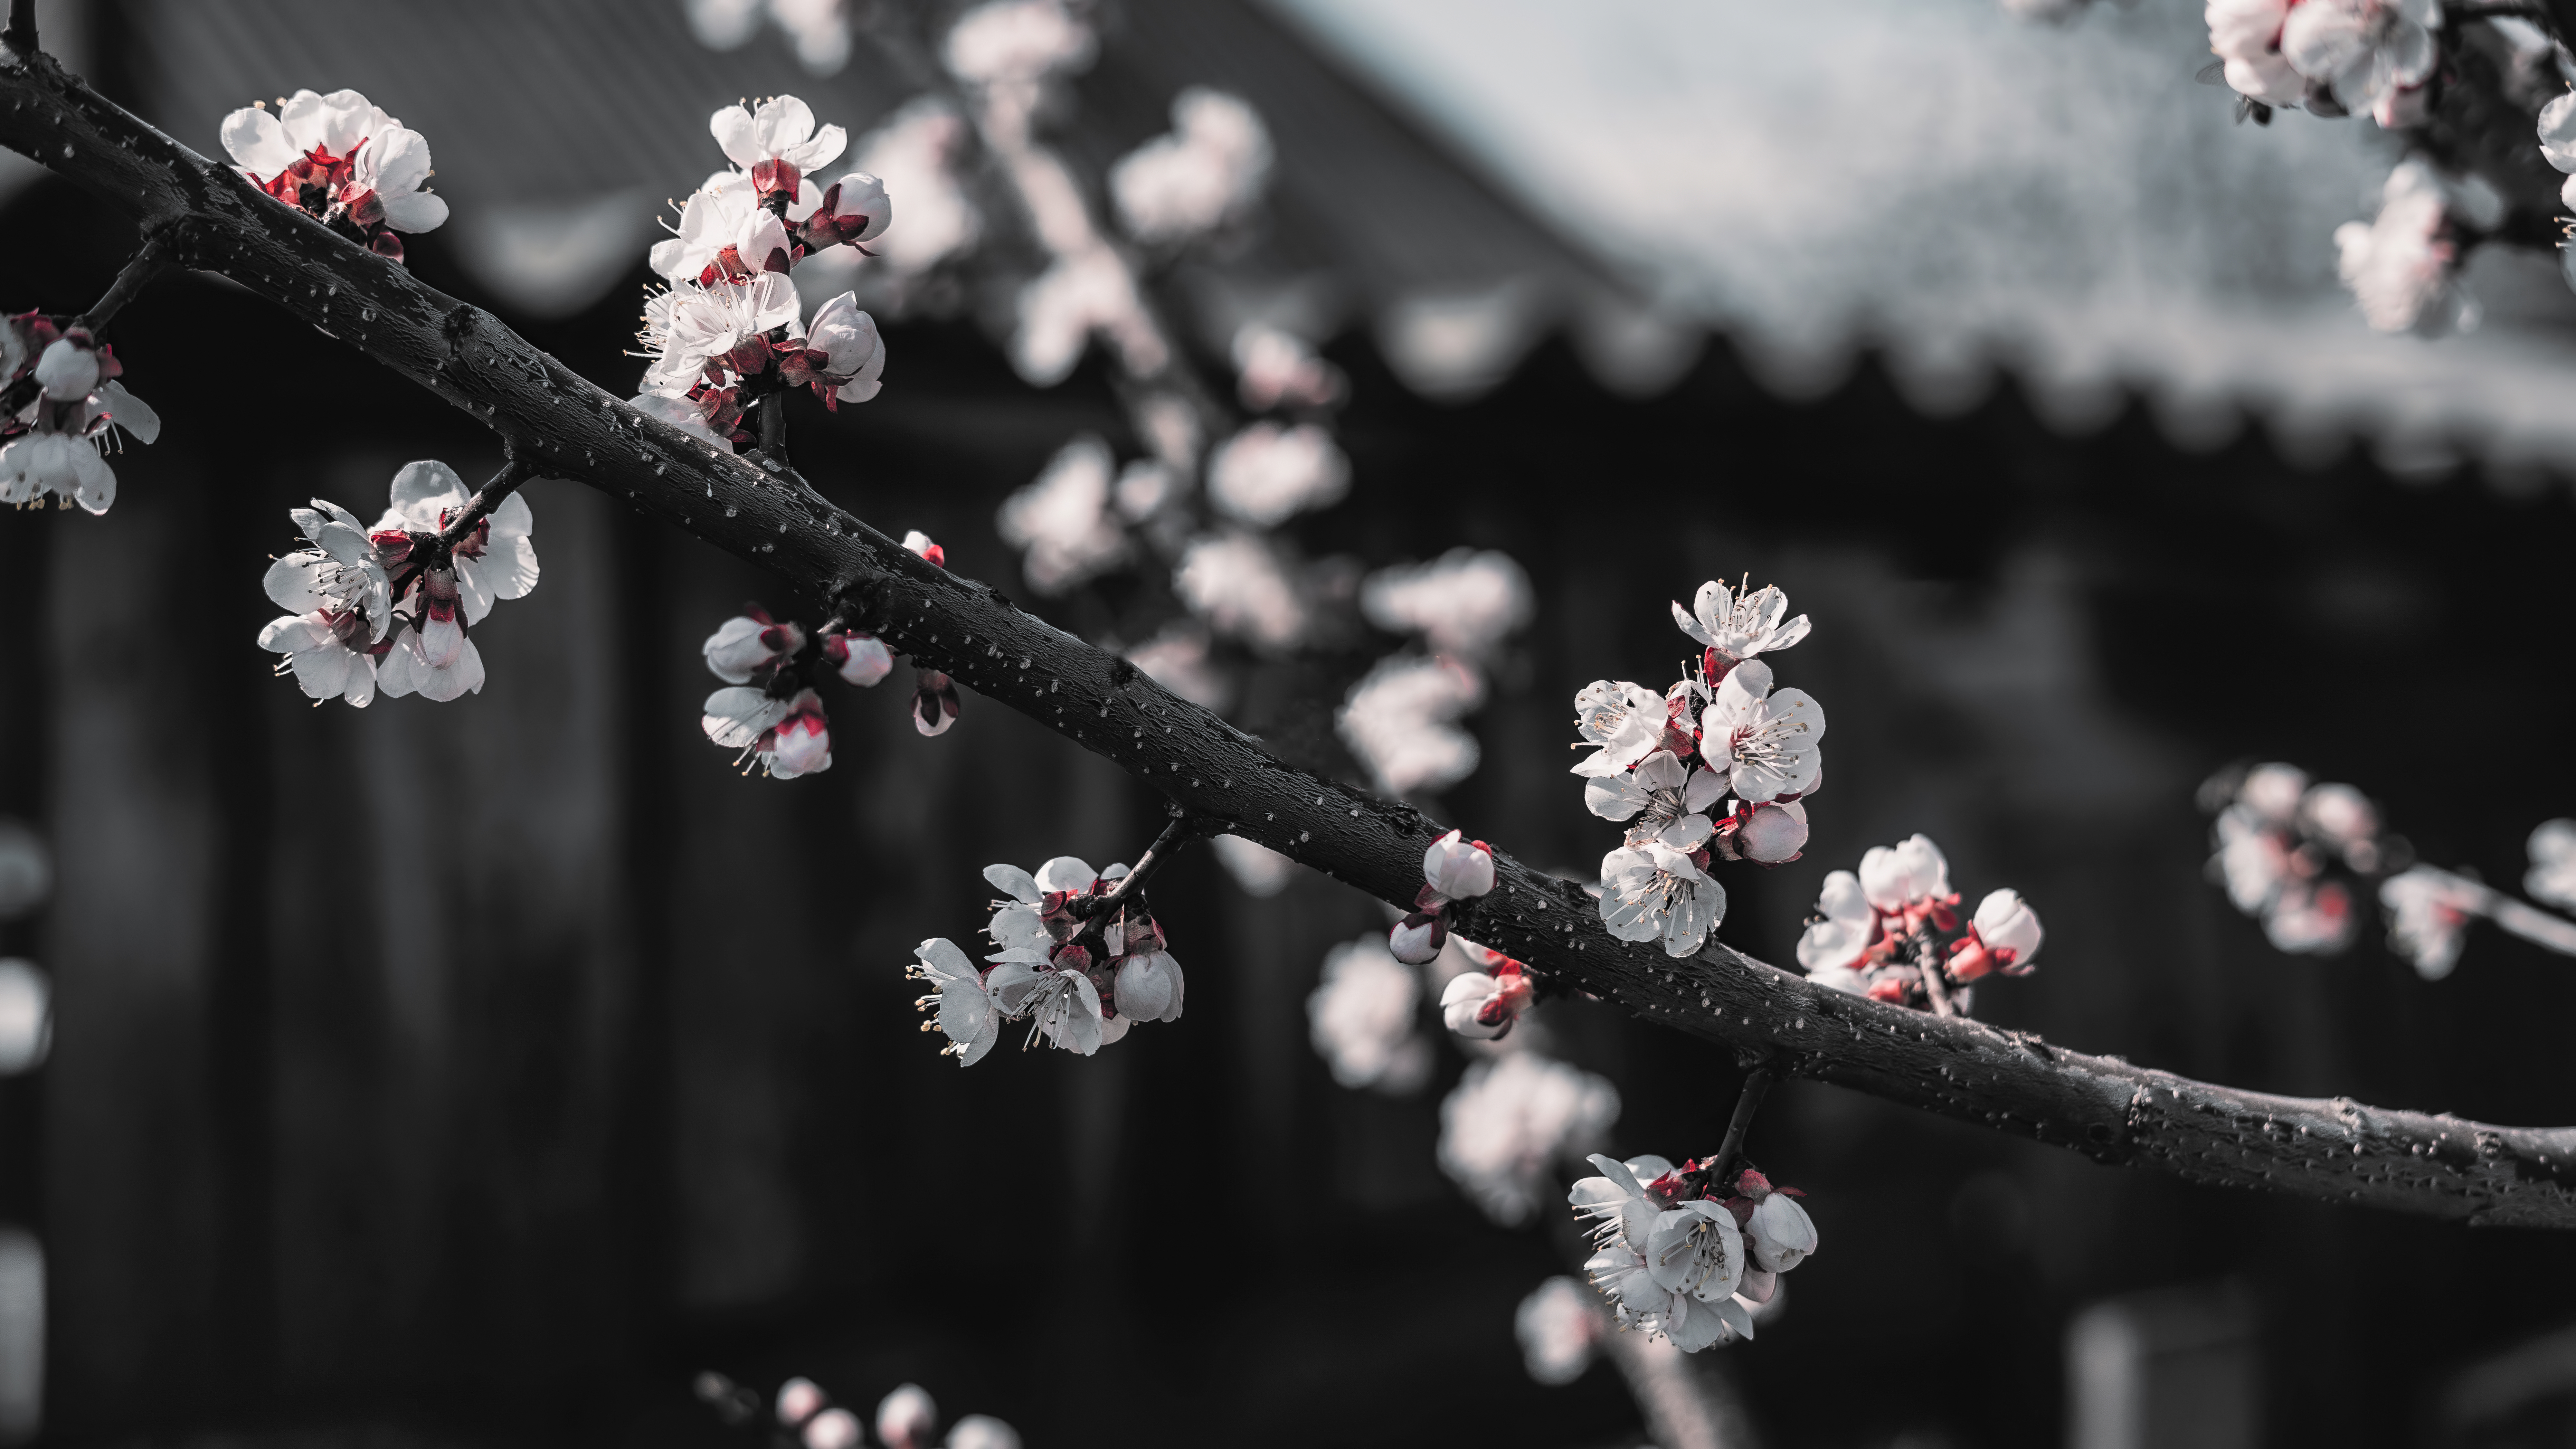 General 8000x4500 cherry blossom red black white selective coloring branch macro